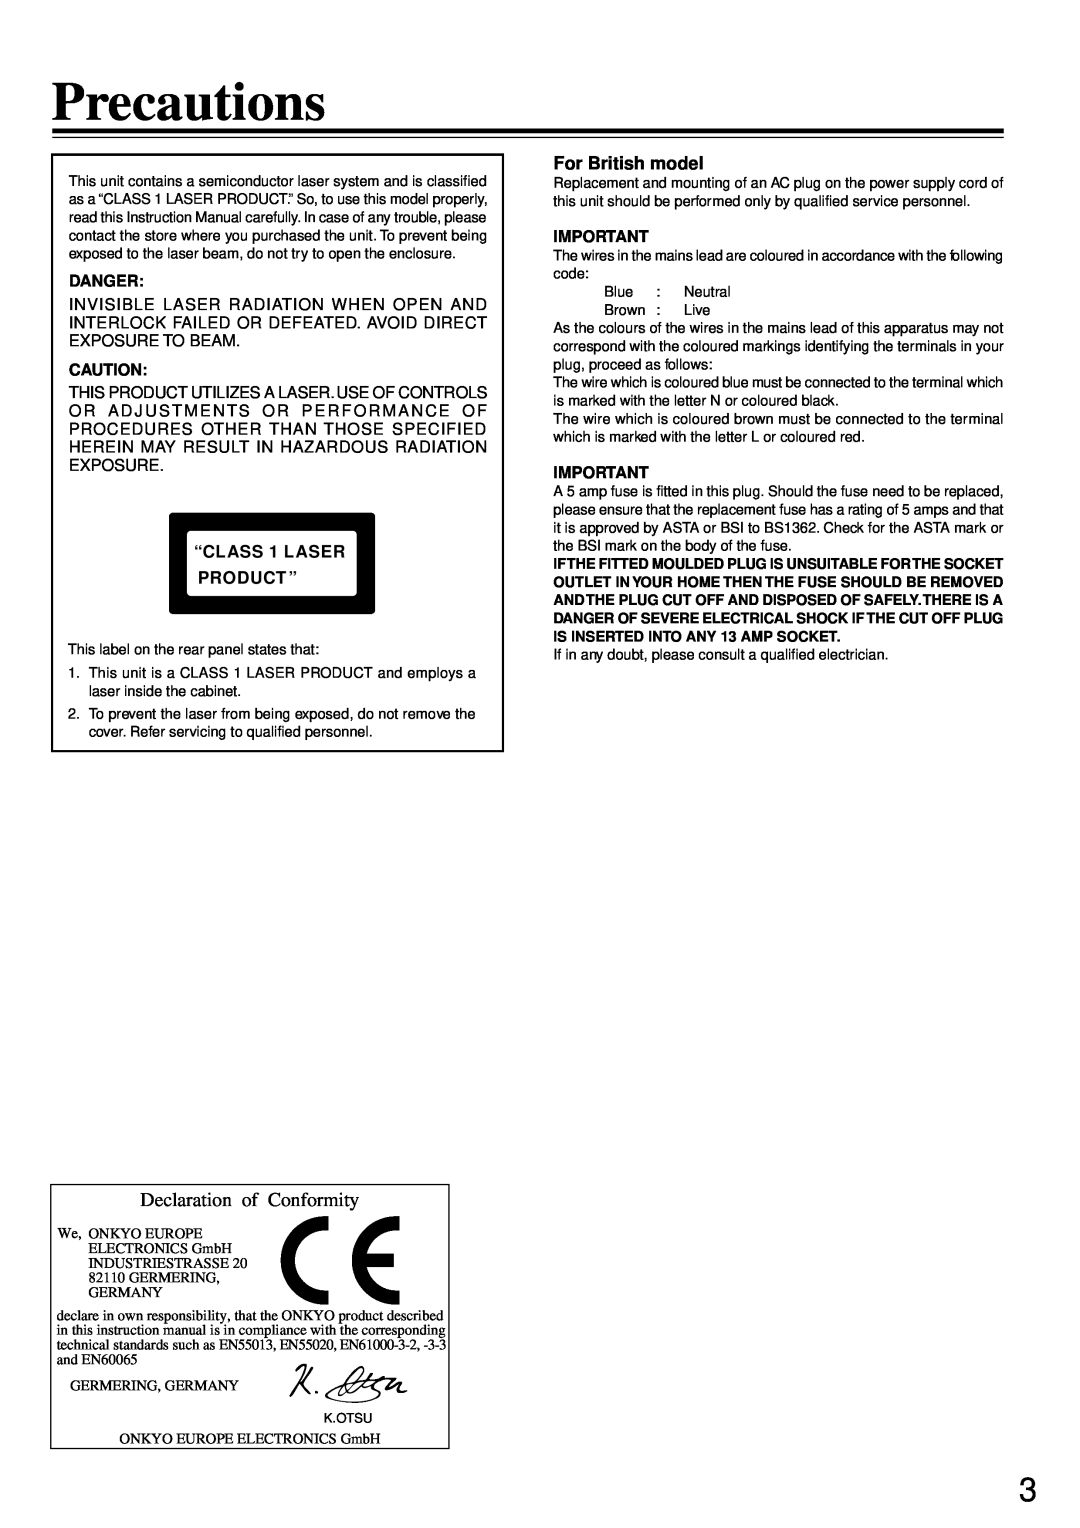 Onkyo DR-90 instruction manual Precautions, Declaration of Conformity, “CLASS 1 LASER PRODUCT ”, For British model, Danger 